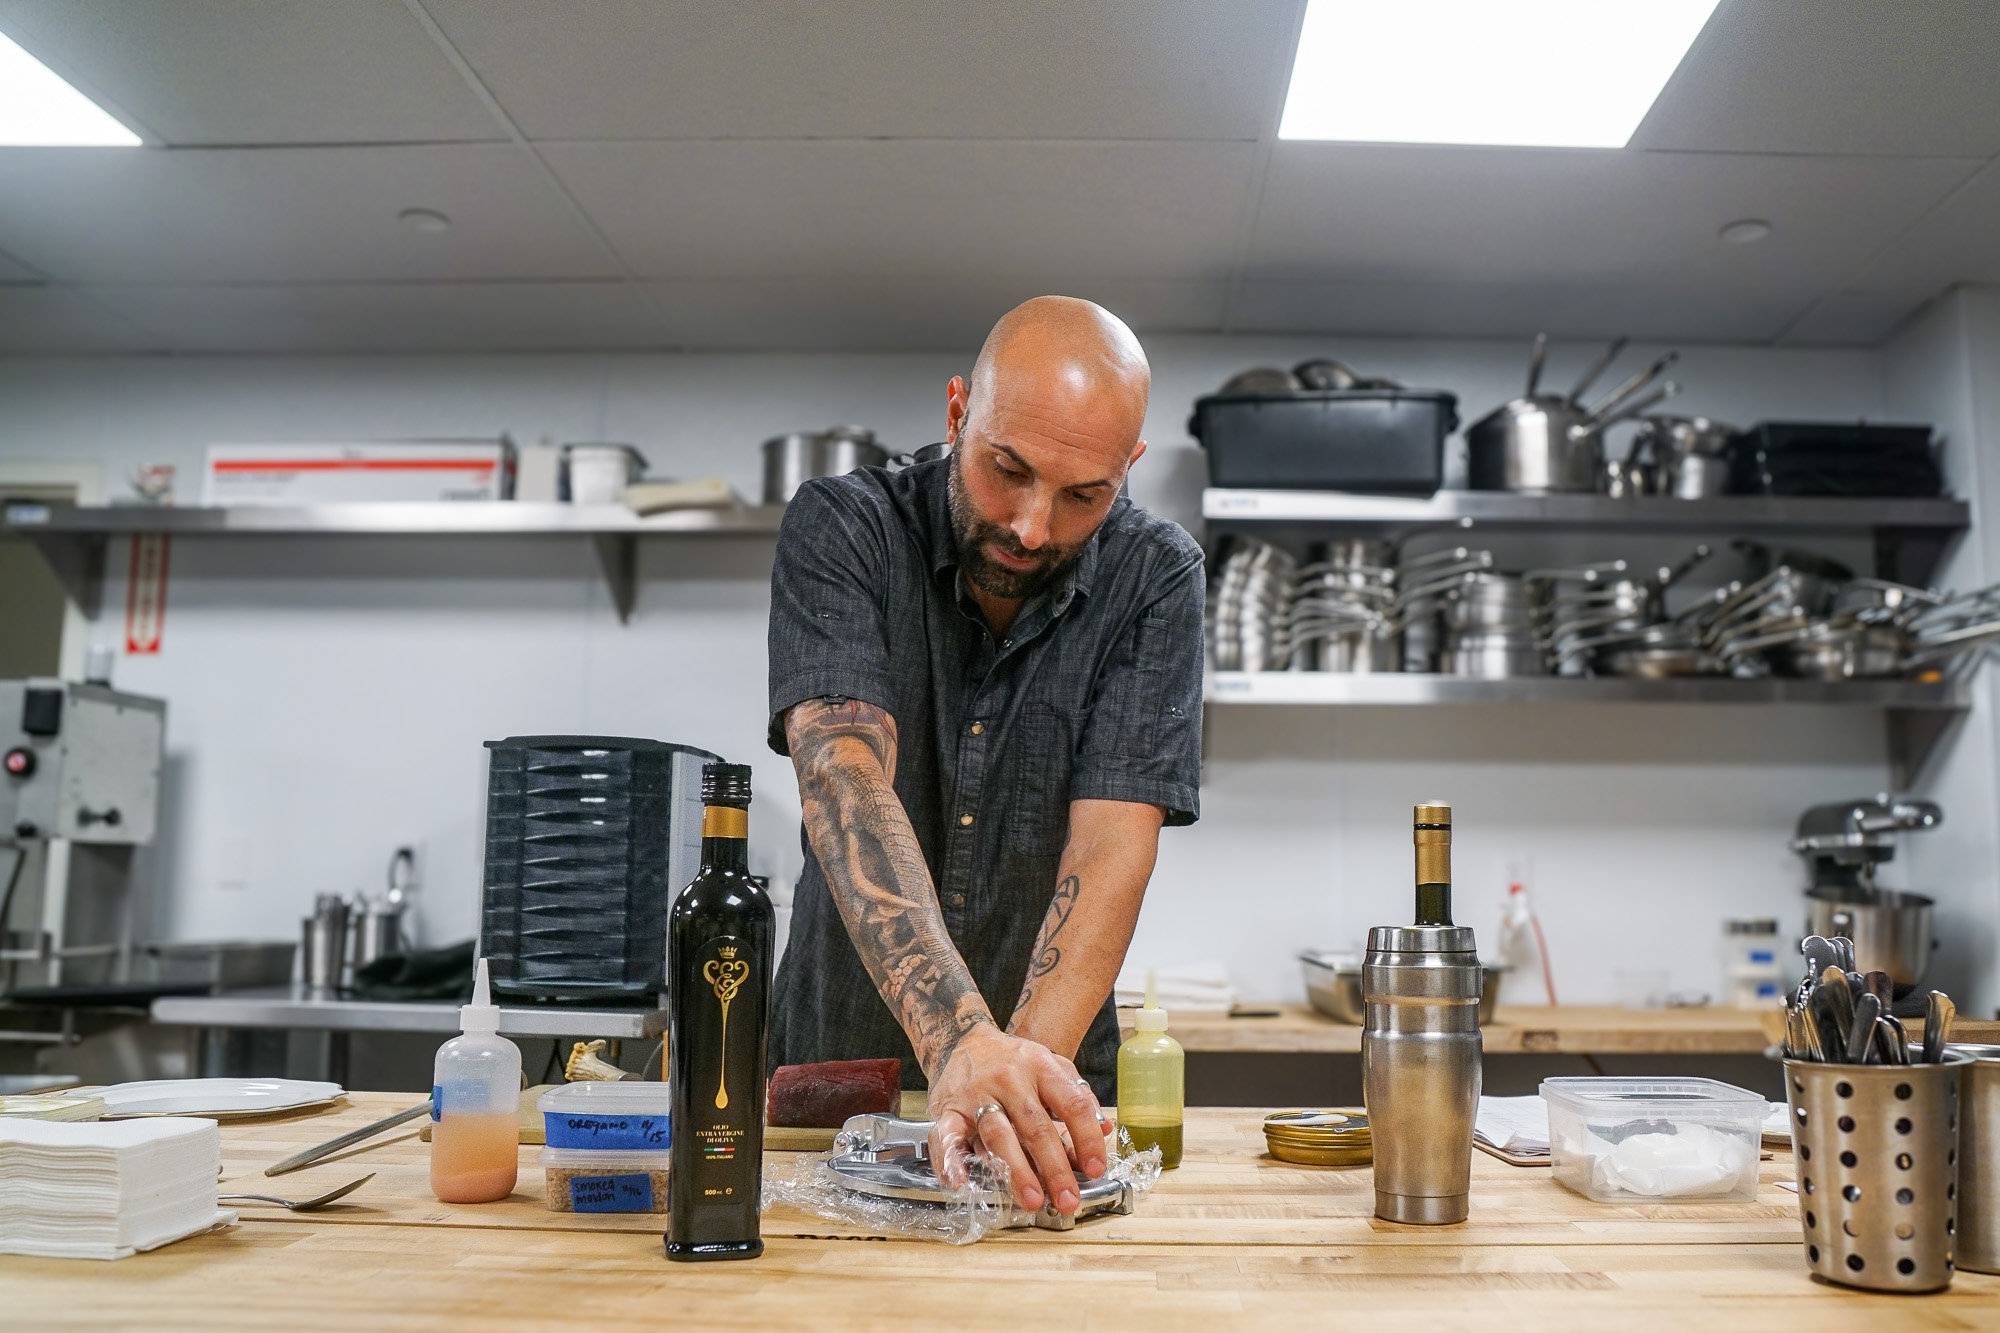 A bald male chef with tattooed arms presses a raw fish.